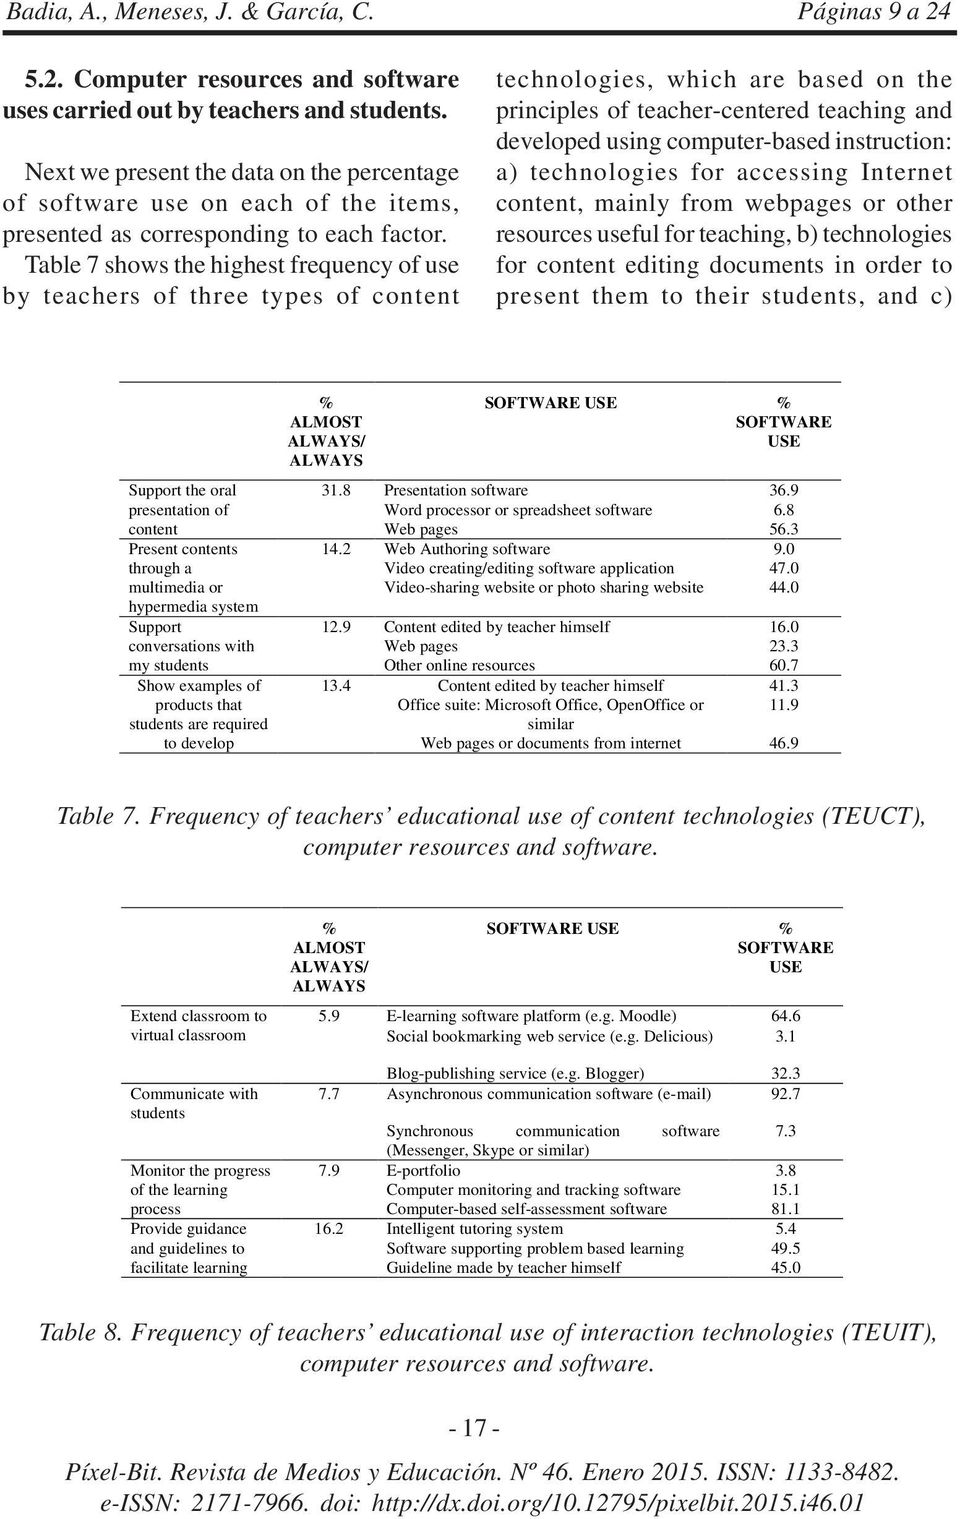 Table 7 shows the highest frequency of use by teachers of three types of content technologies, which are based on the principles of teacher-centered teaching and developed using computer-based